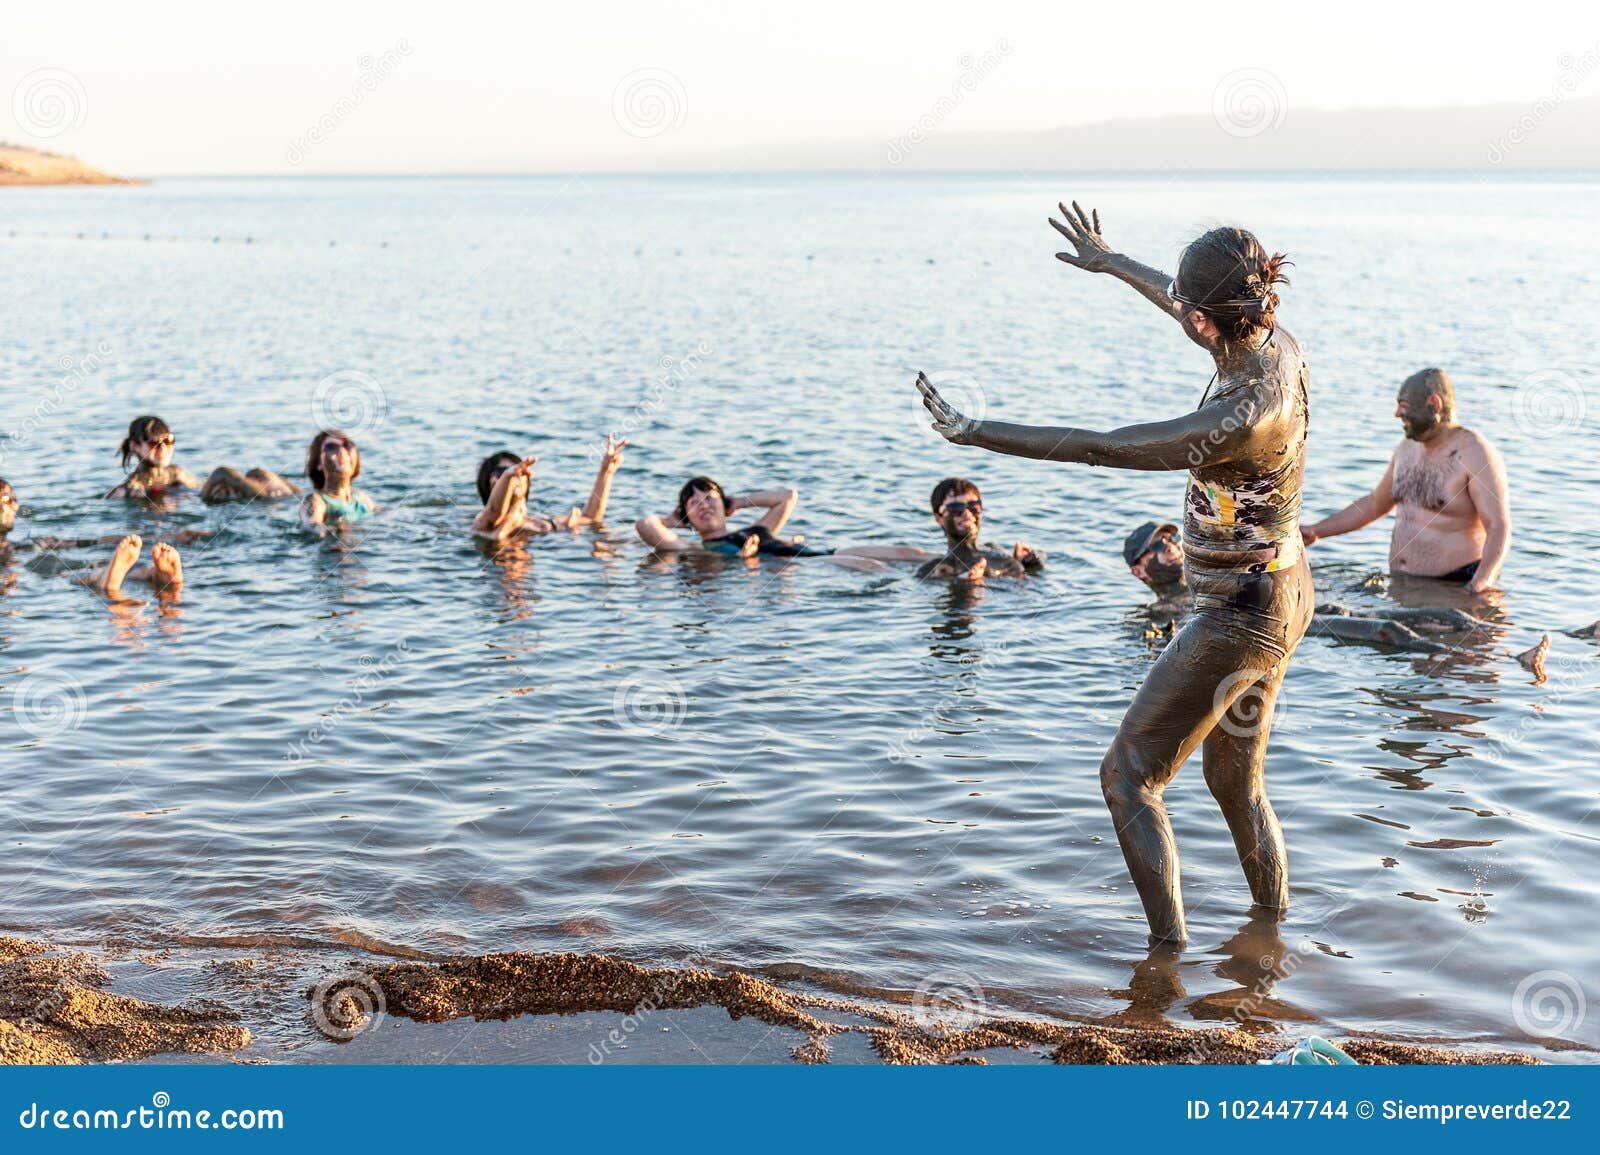 Dead Sea editorial stock image. Image of medical - 102447744